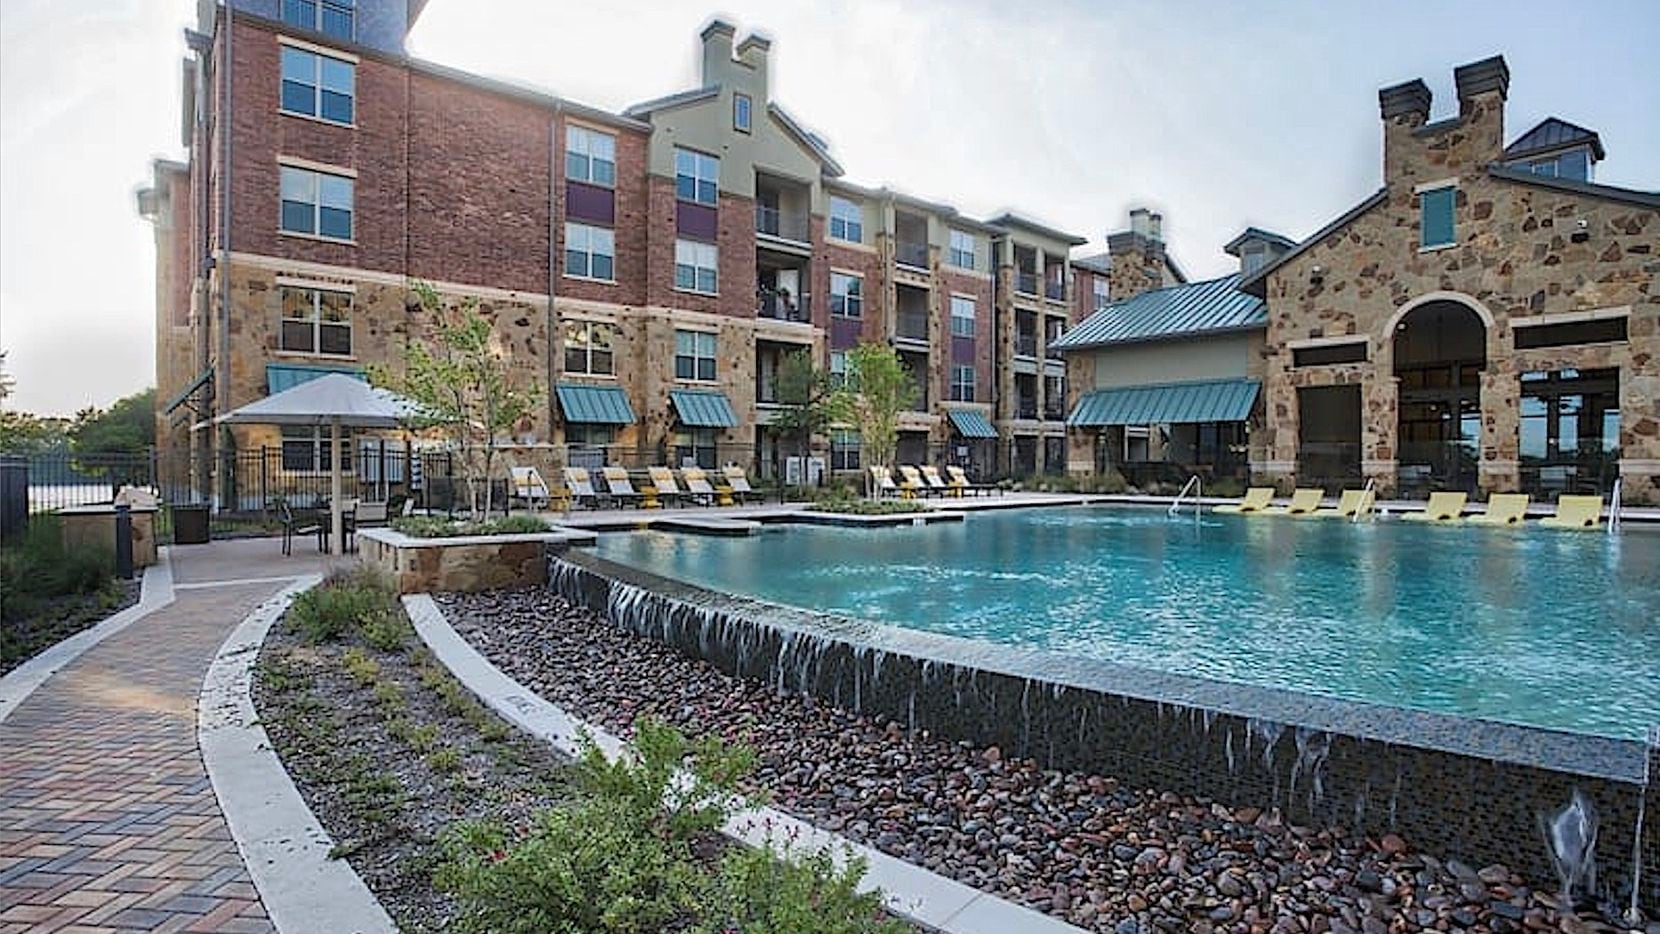 The Lakeside Lofts in Farmers Branch near LBJ Freeway were purchased by Lone Star Funds.